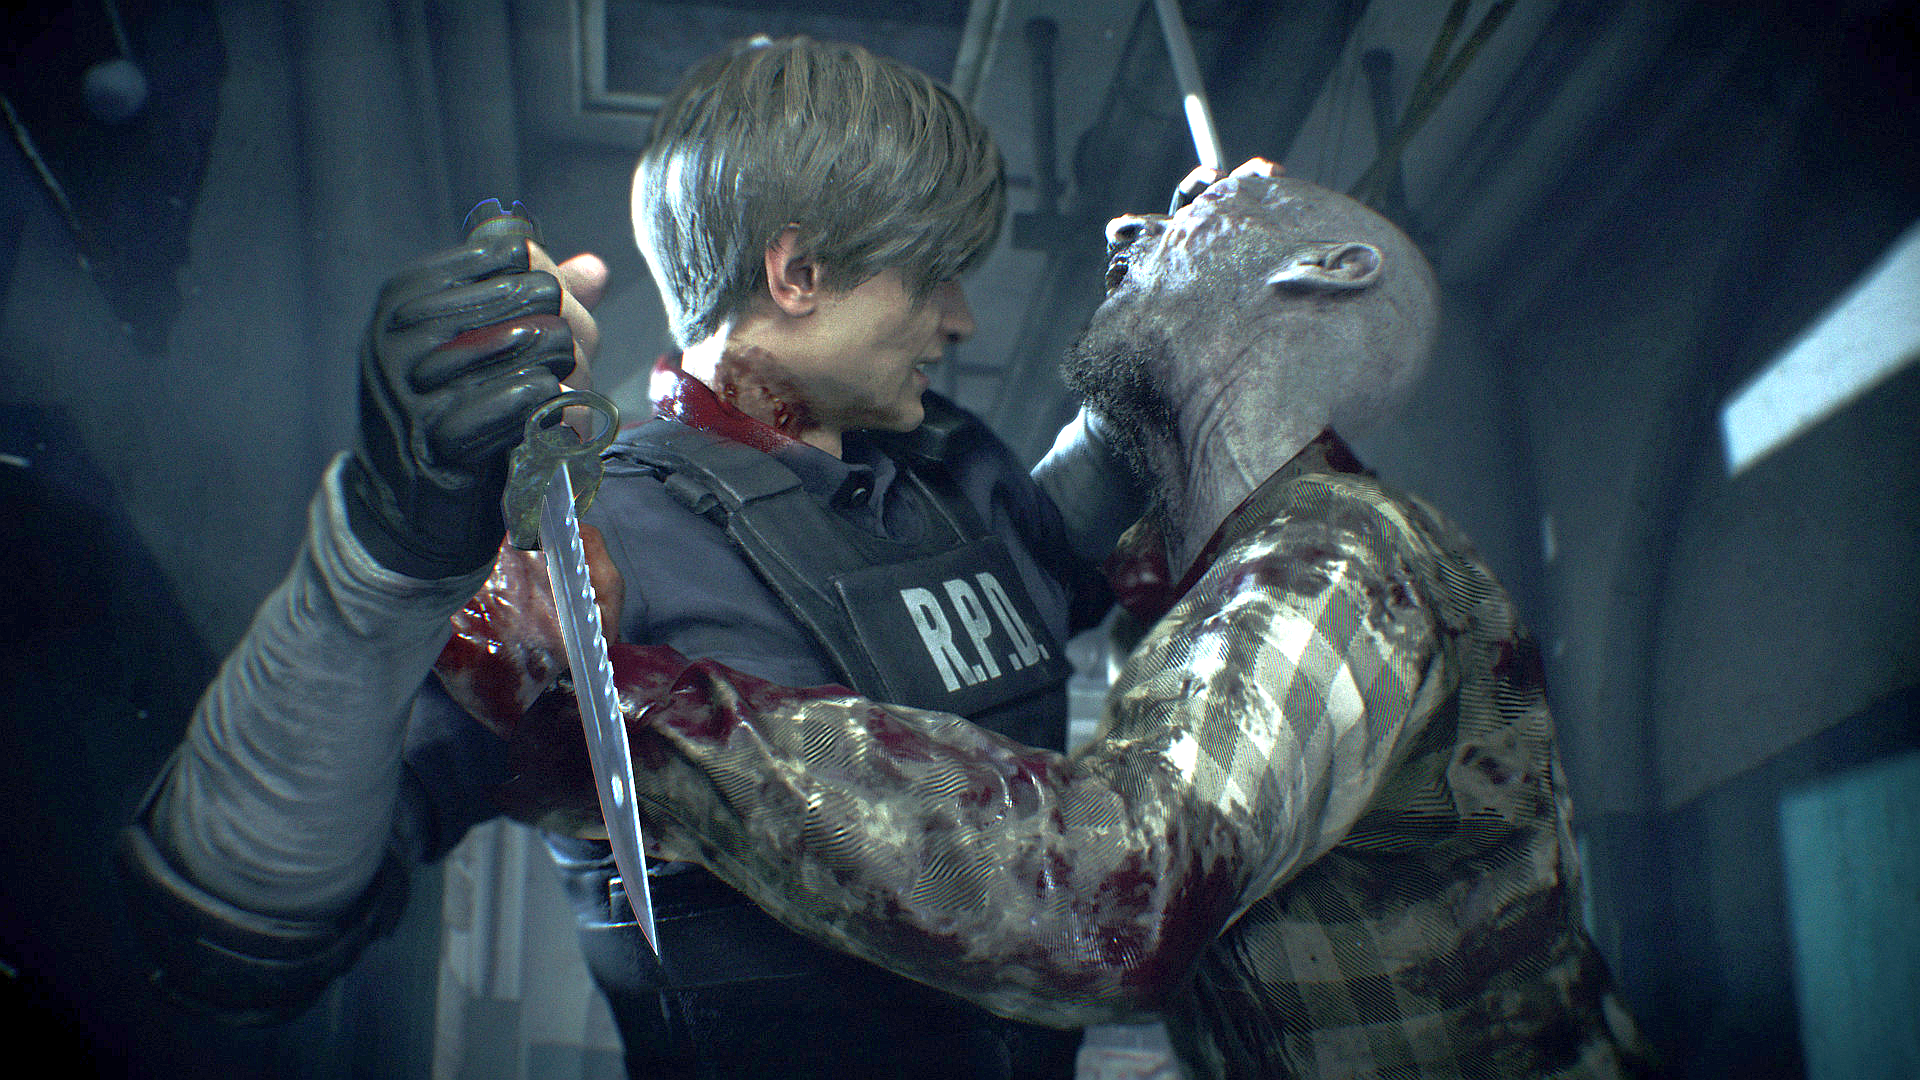 E3 Trailer: See Leon's New Look in 'Resident Evil 2' Remake